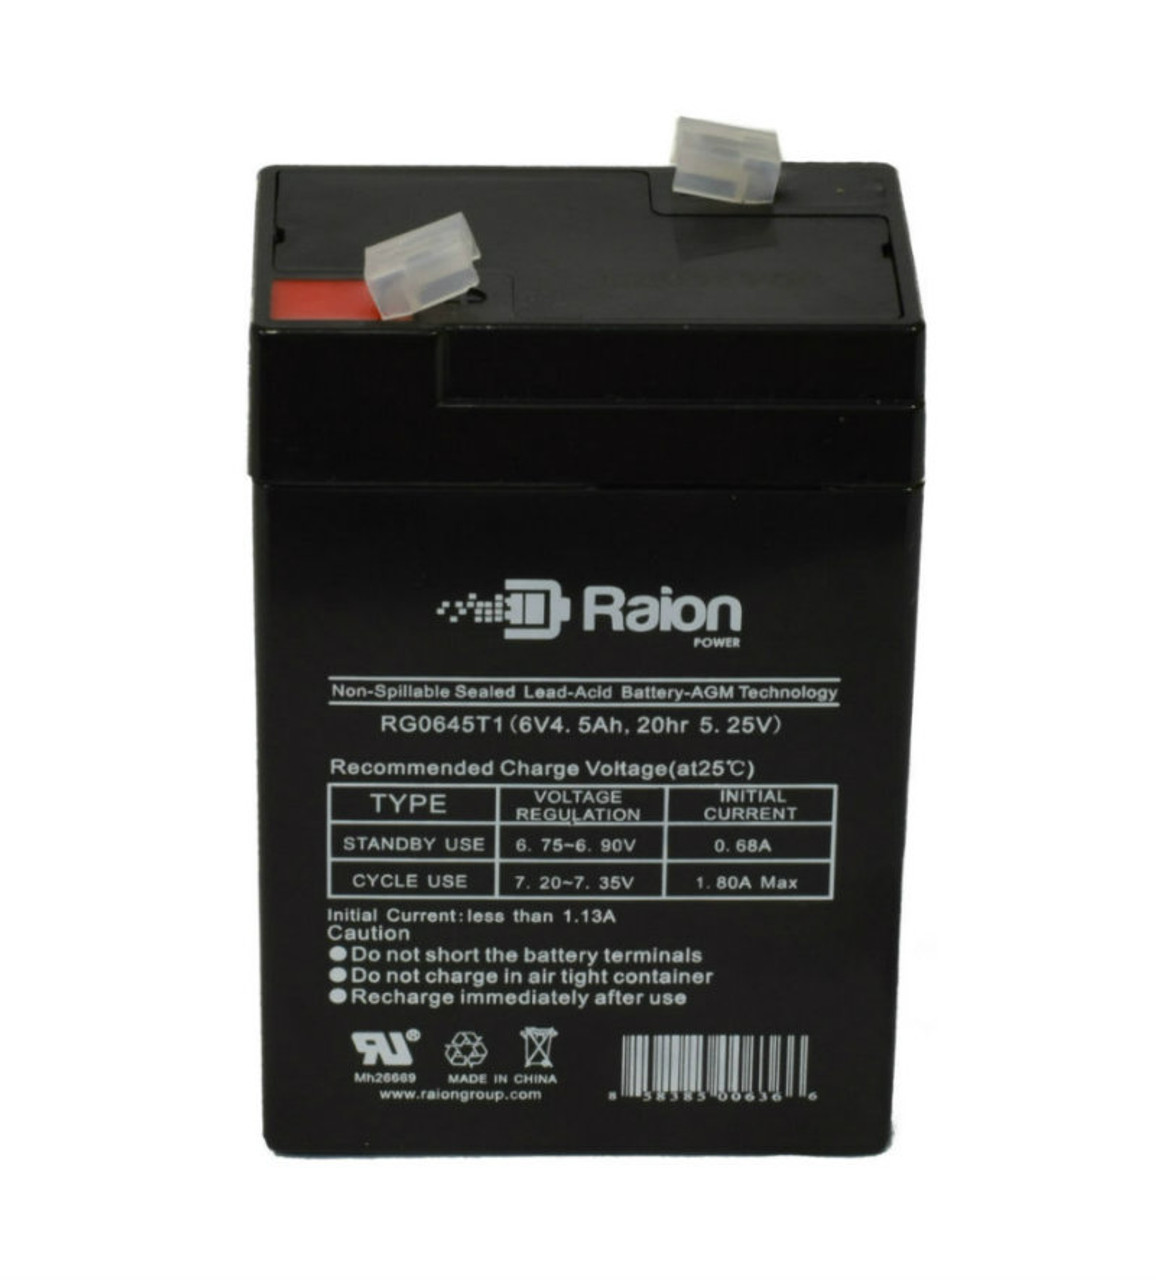 Raion Power RG0645T1 Replacement Battery Cartridge for Japan PE6V4